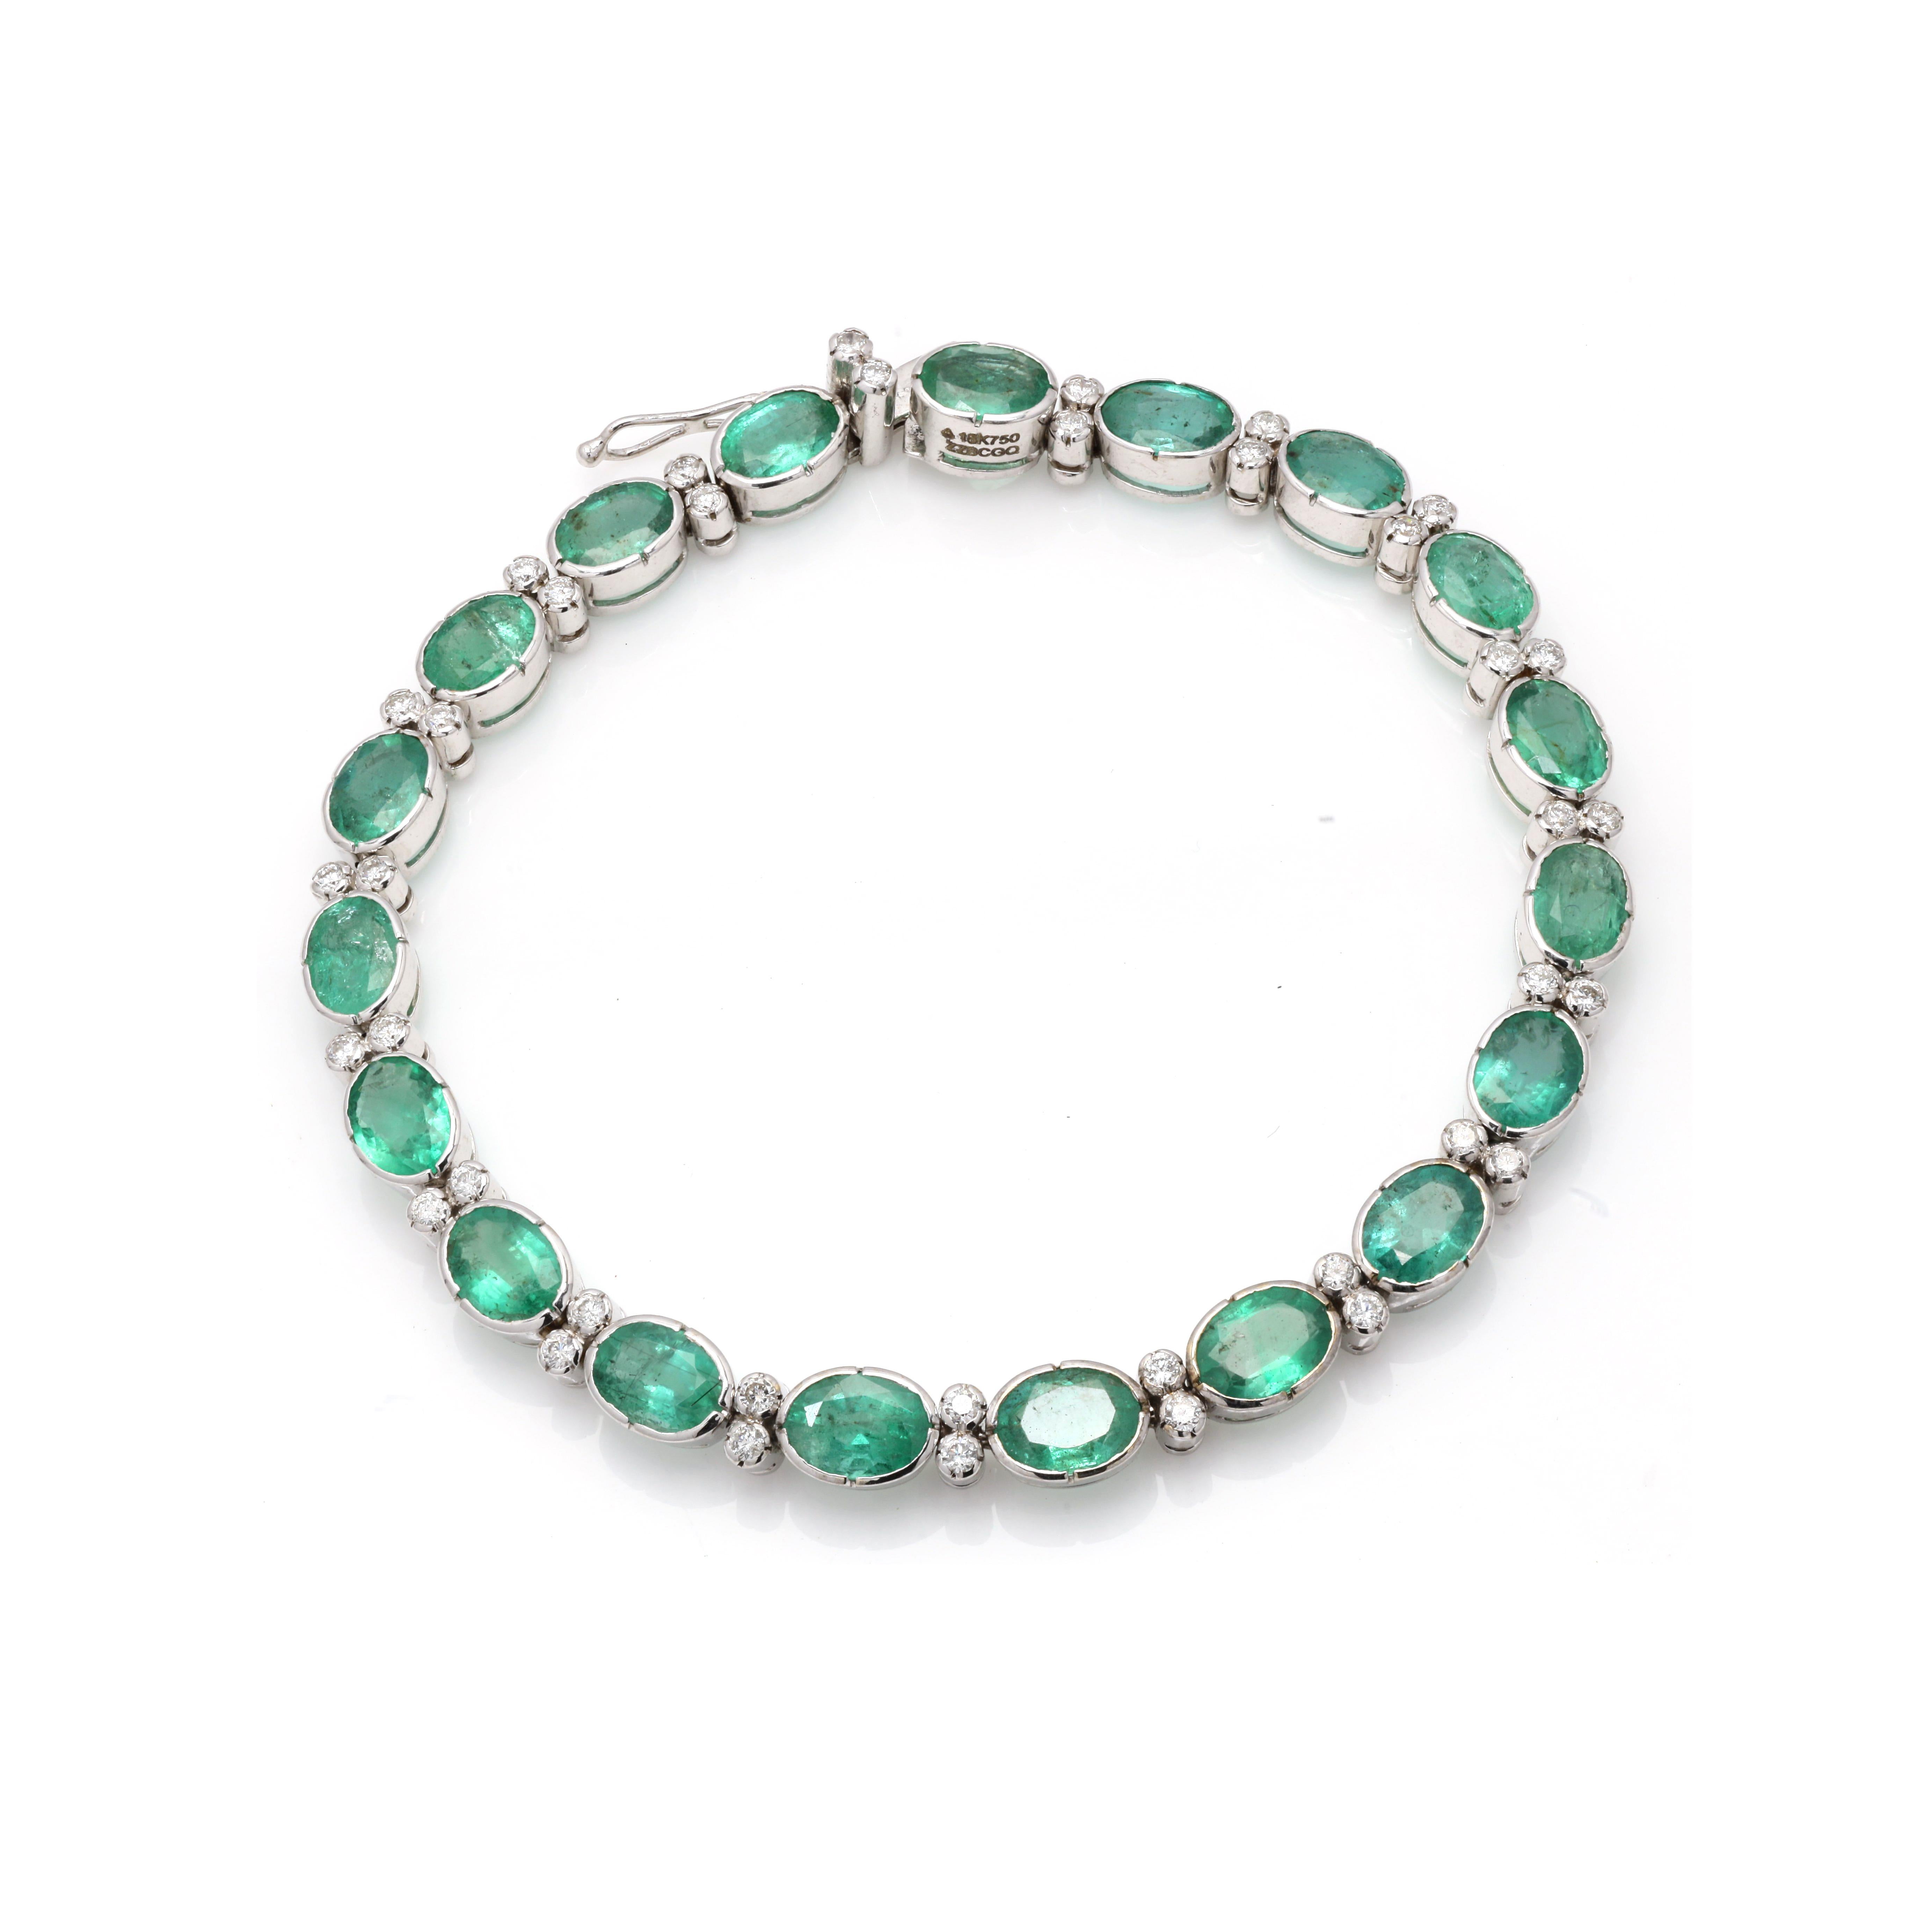 14.15 ct Emerald Diamond Tennis Bracelet in 18K Gold. It has a perfect oval cut gemstone to make you stand out on any occasion or an event.
Emerald invites abundance, love and luck into your life. 
Featuring 14.15 cts of emerald gemstone with